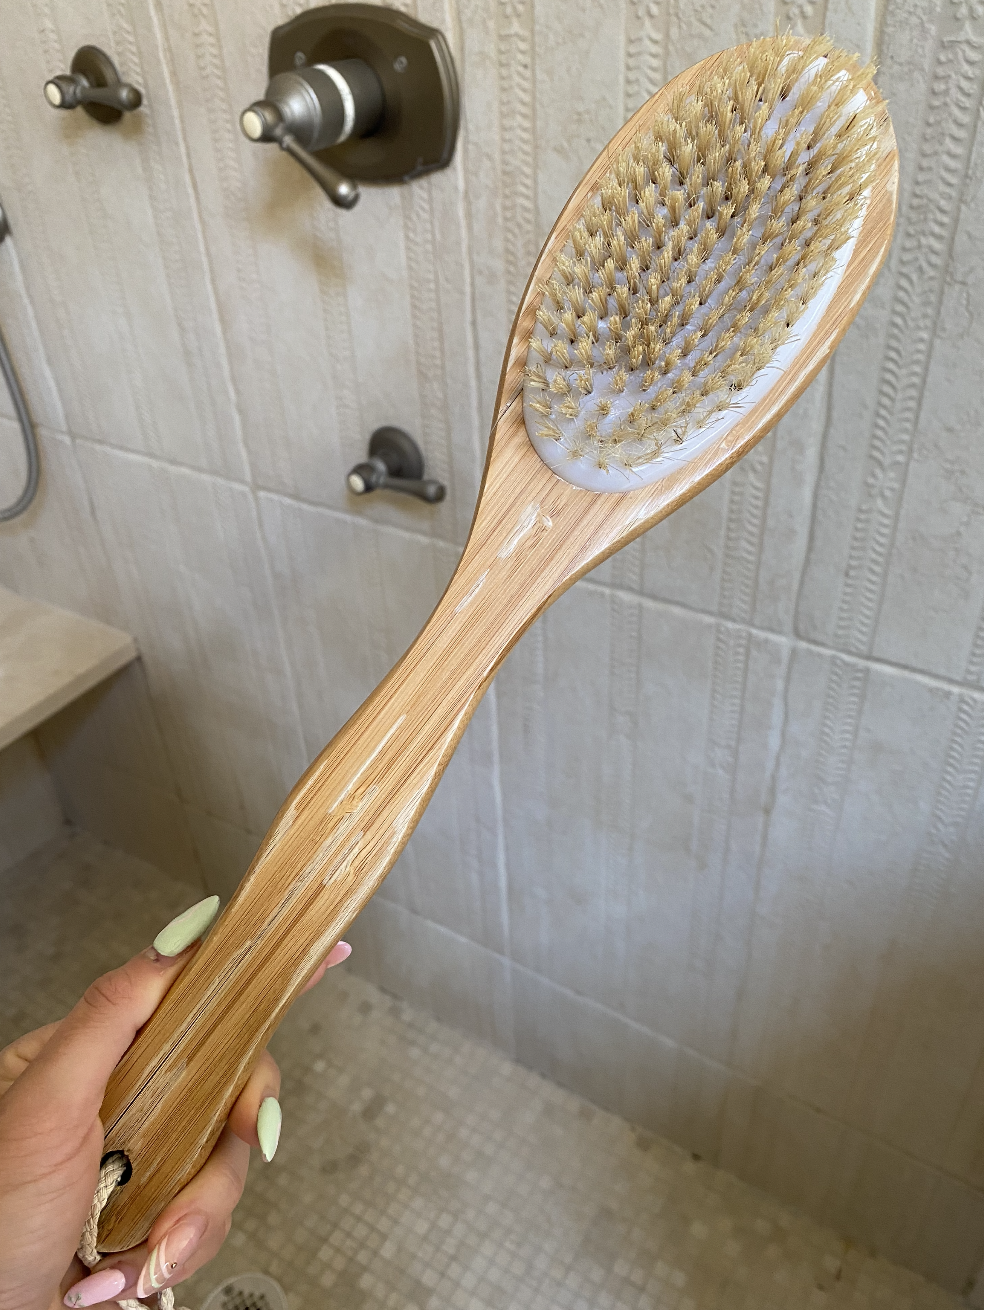 The author holding up a bristle brush in her shower